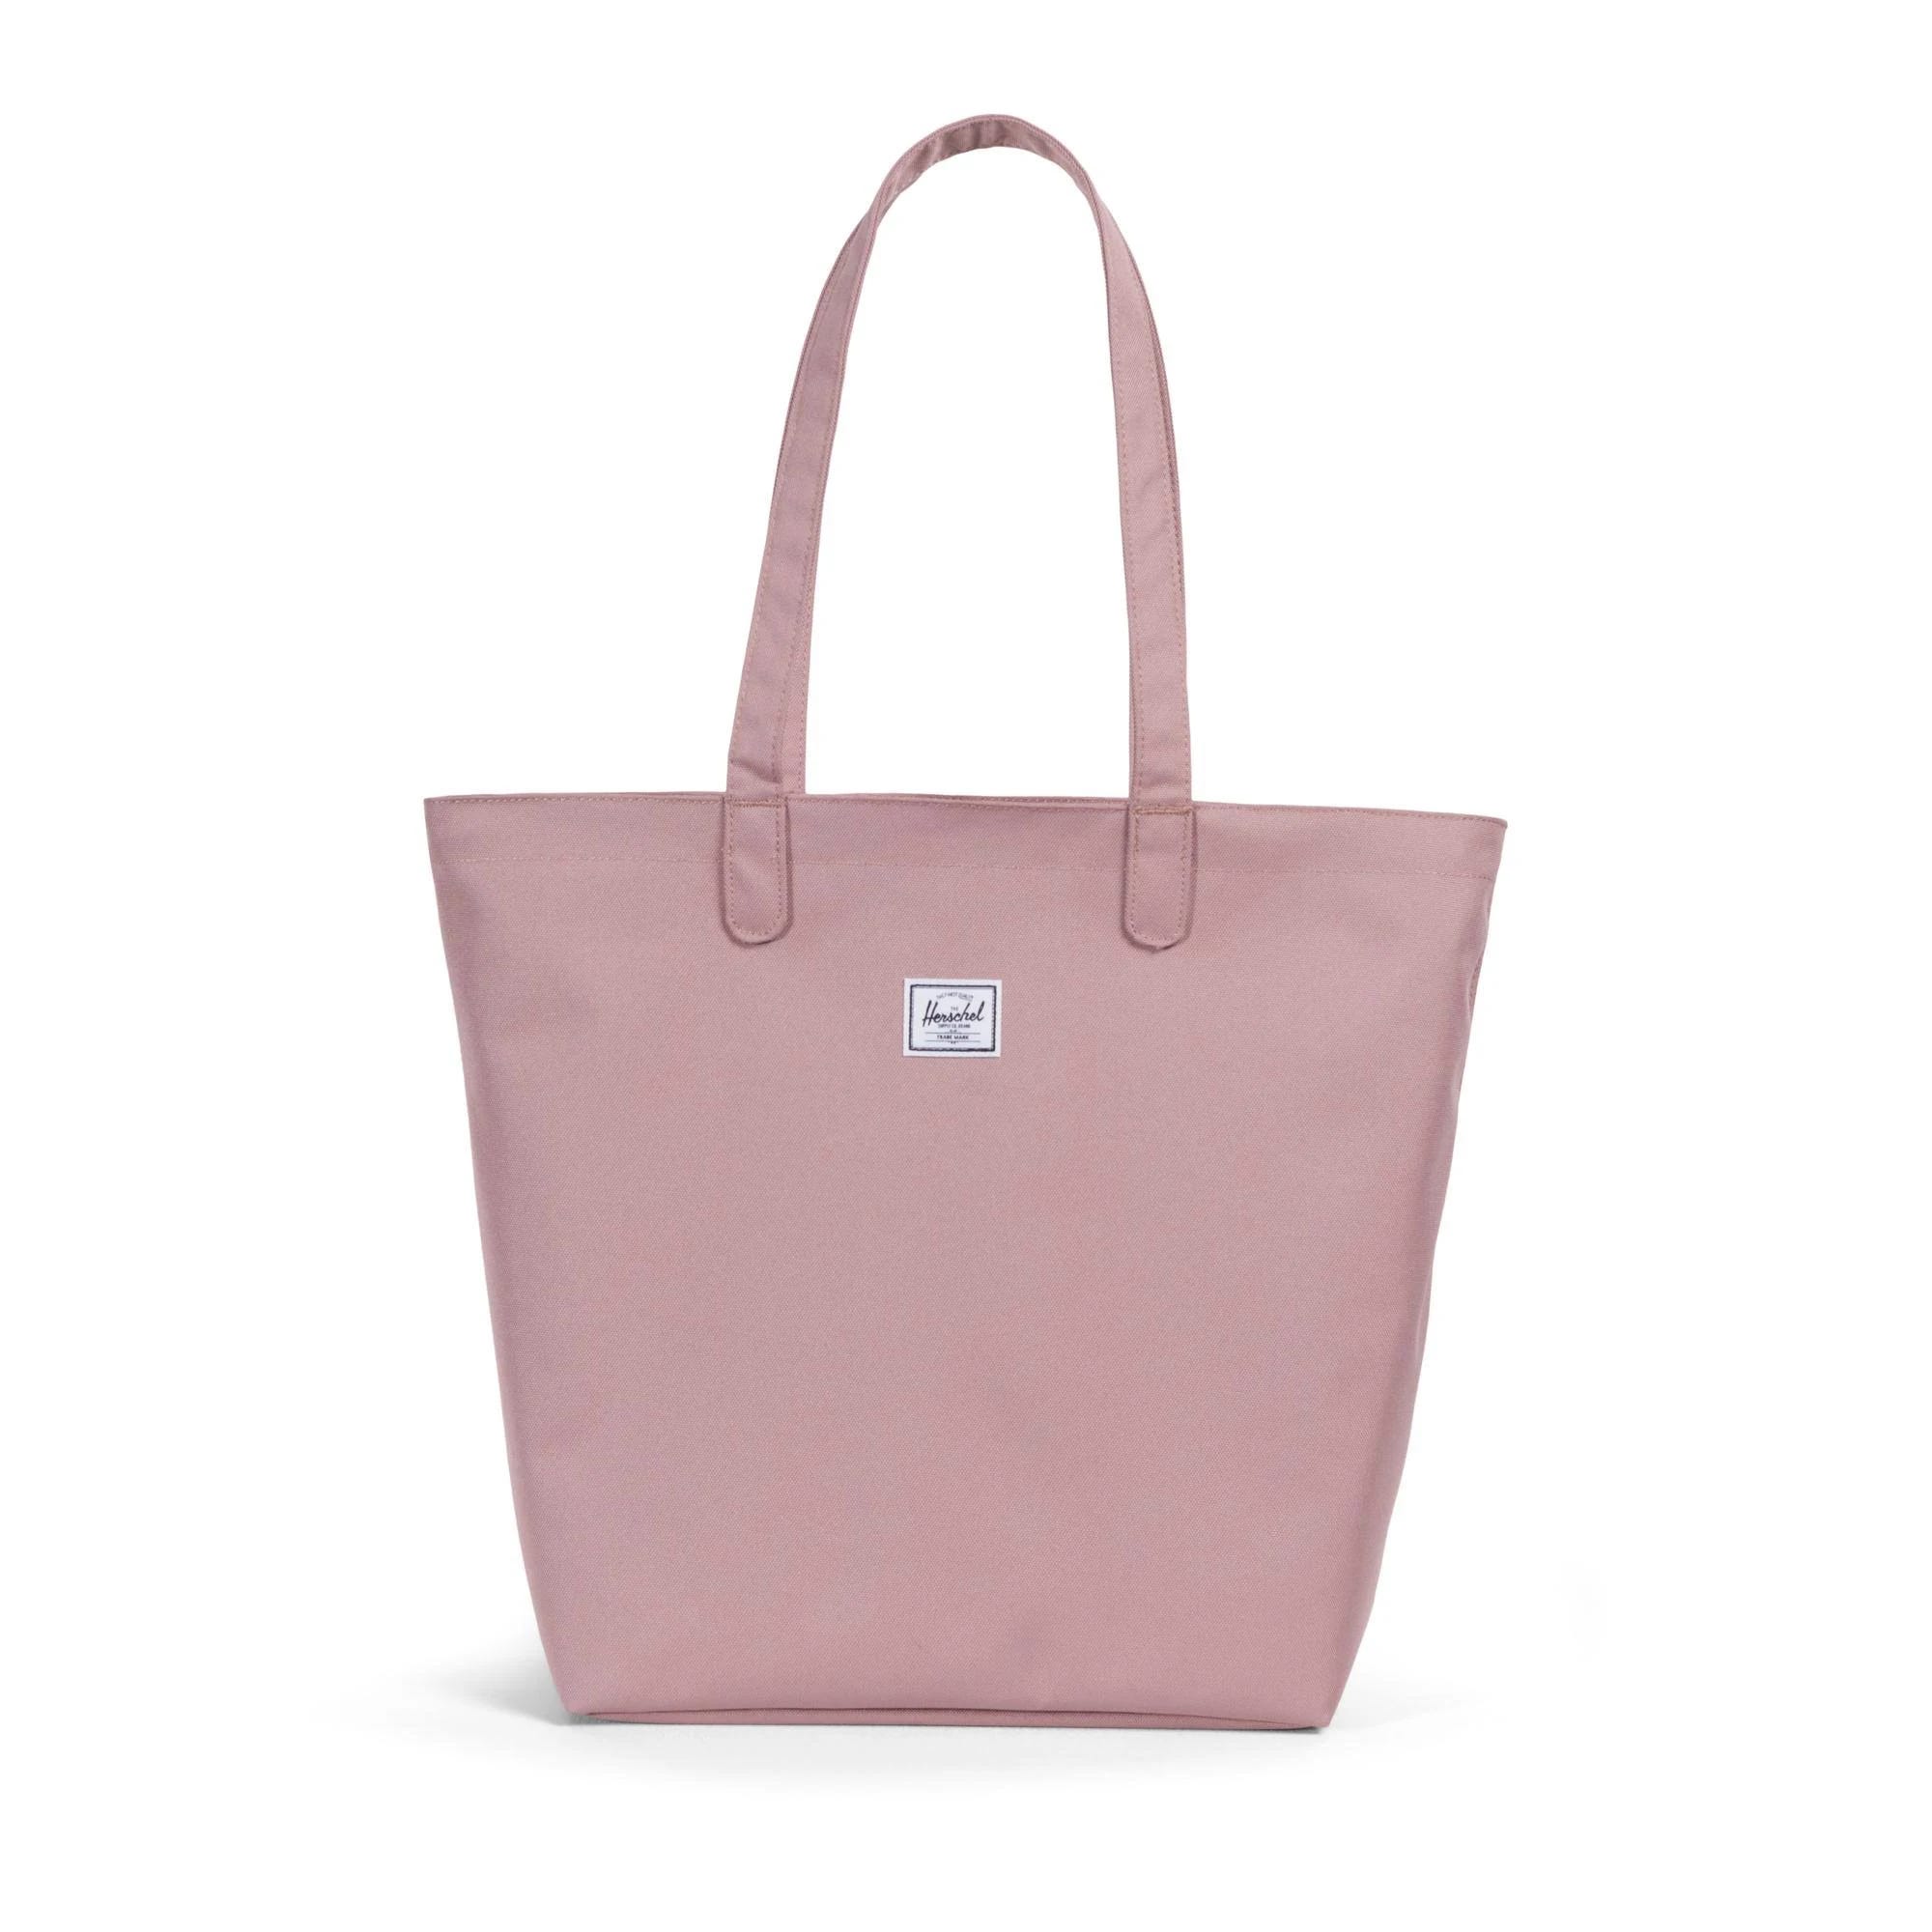 Pink Leather Ladies Tote Bag by Herschel Supply Co | Image